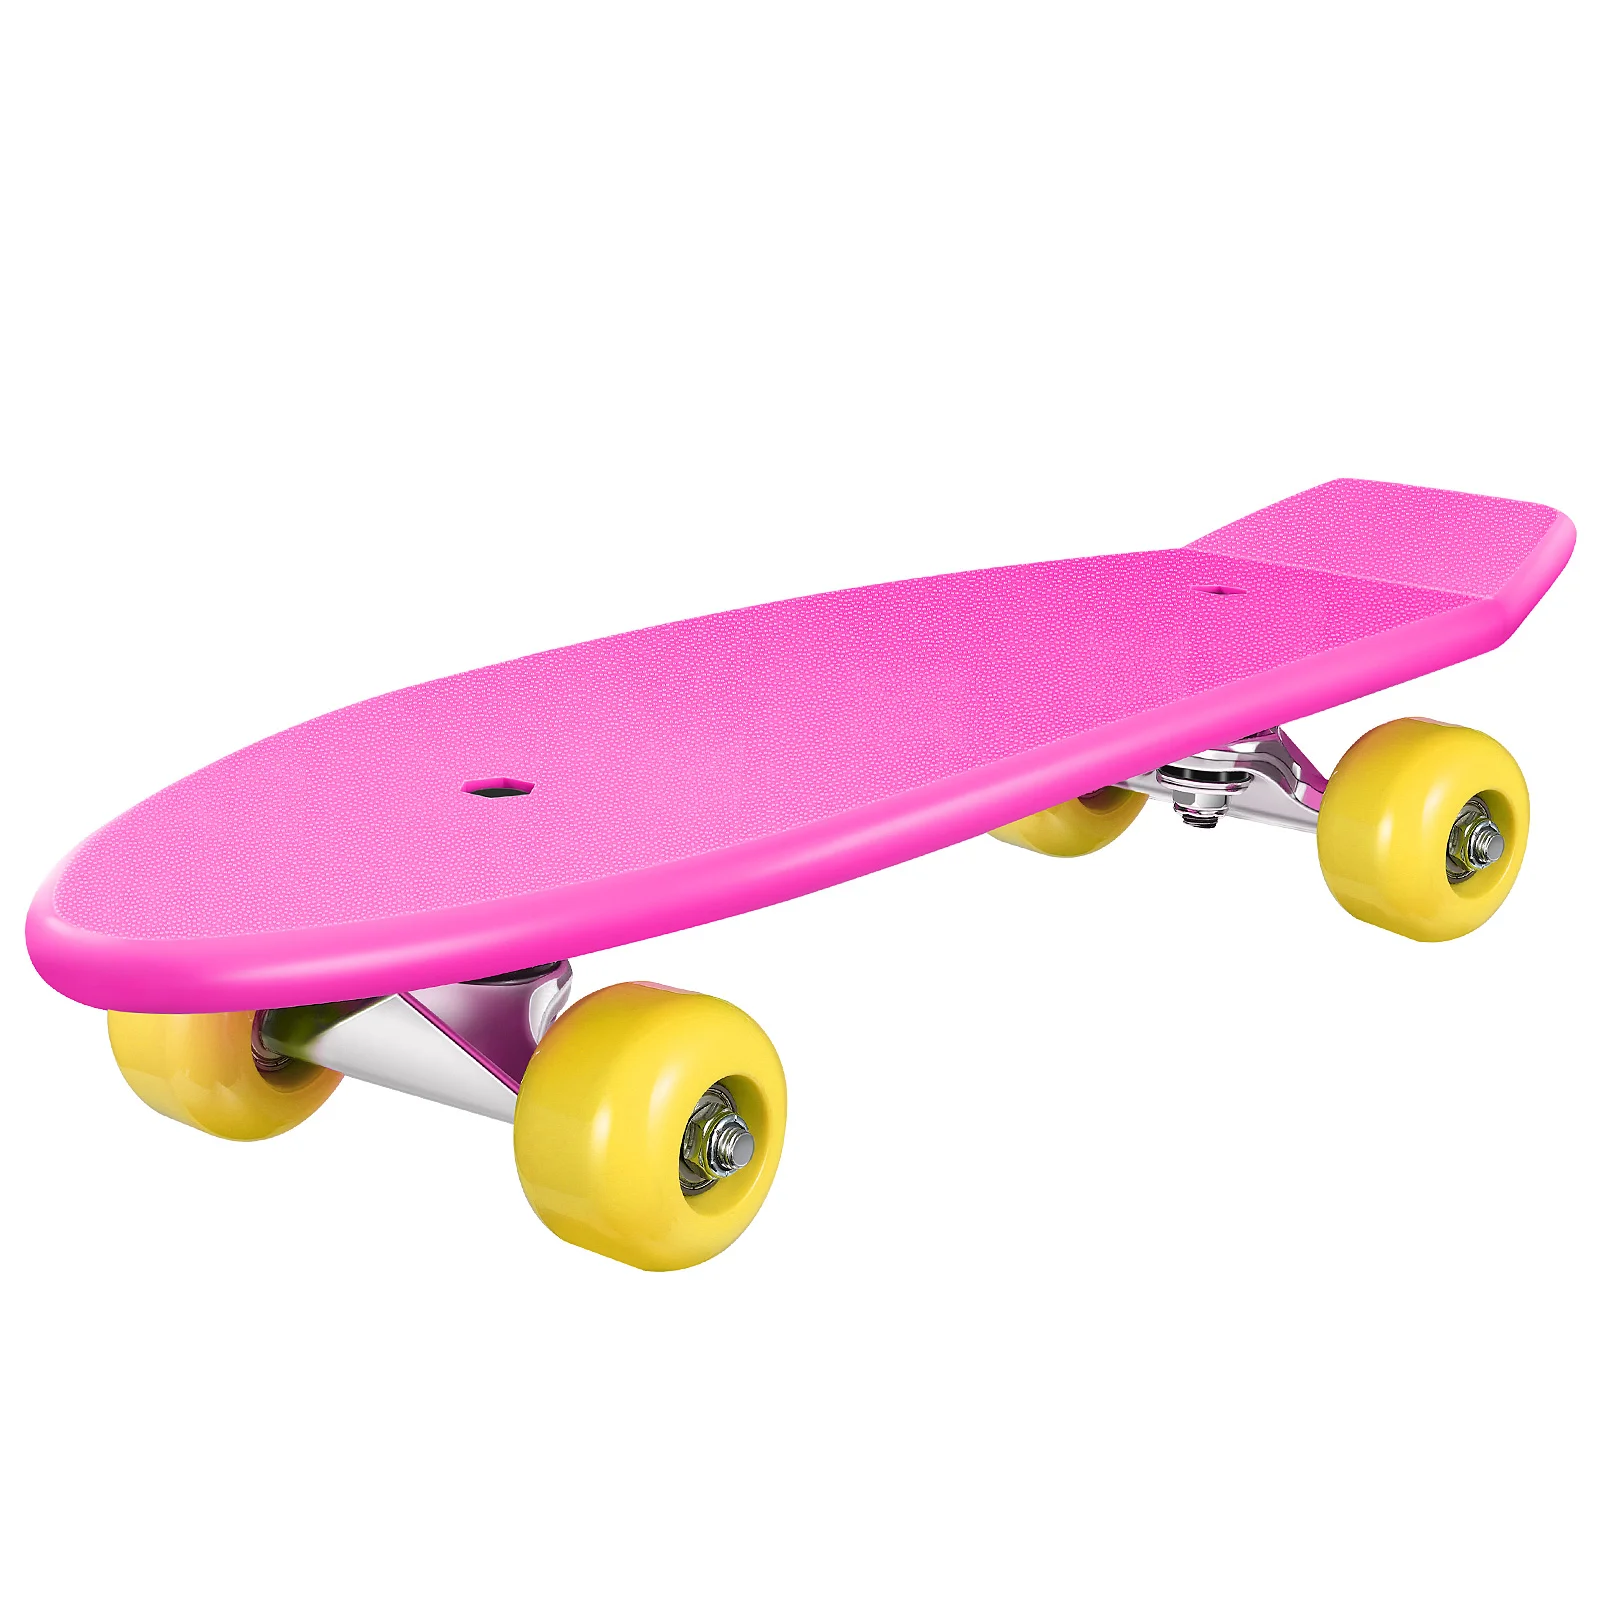 

MOVTOTOP Kids Skateboard Kit Complete Skateboard Downhill Longboard with Protective Gears for Boys Girls Kids Beginners (Pink)